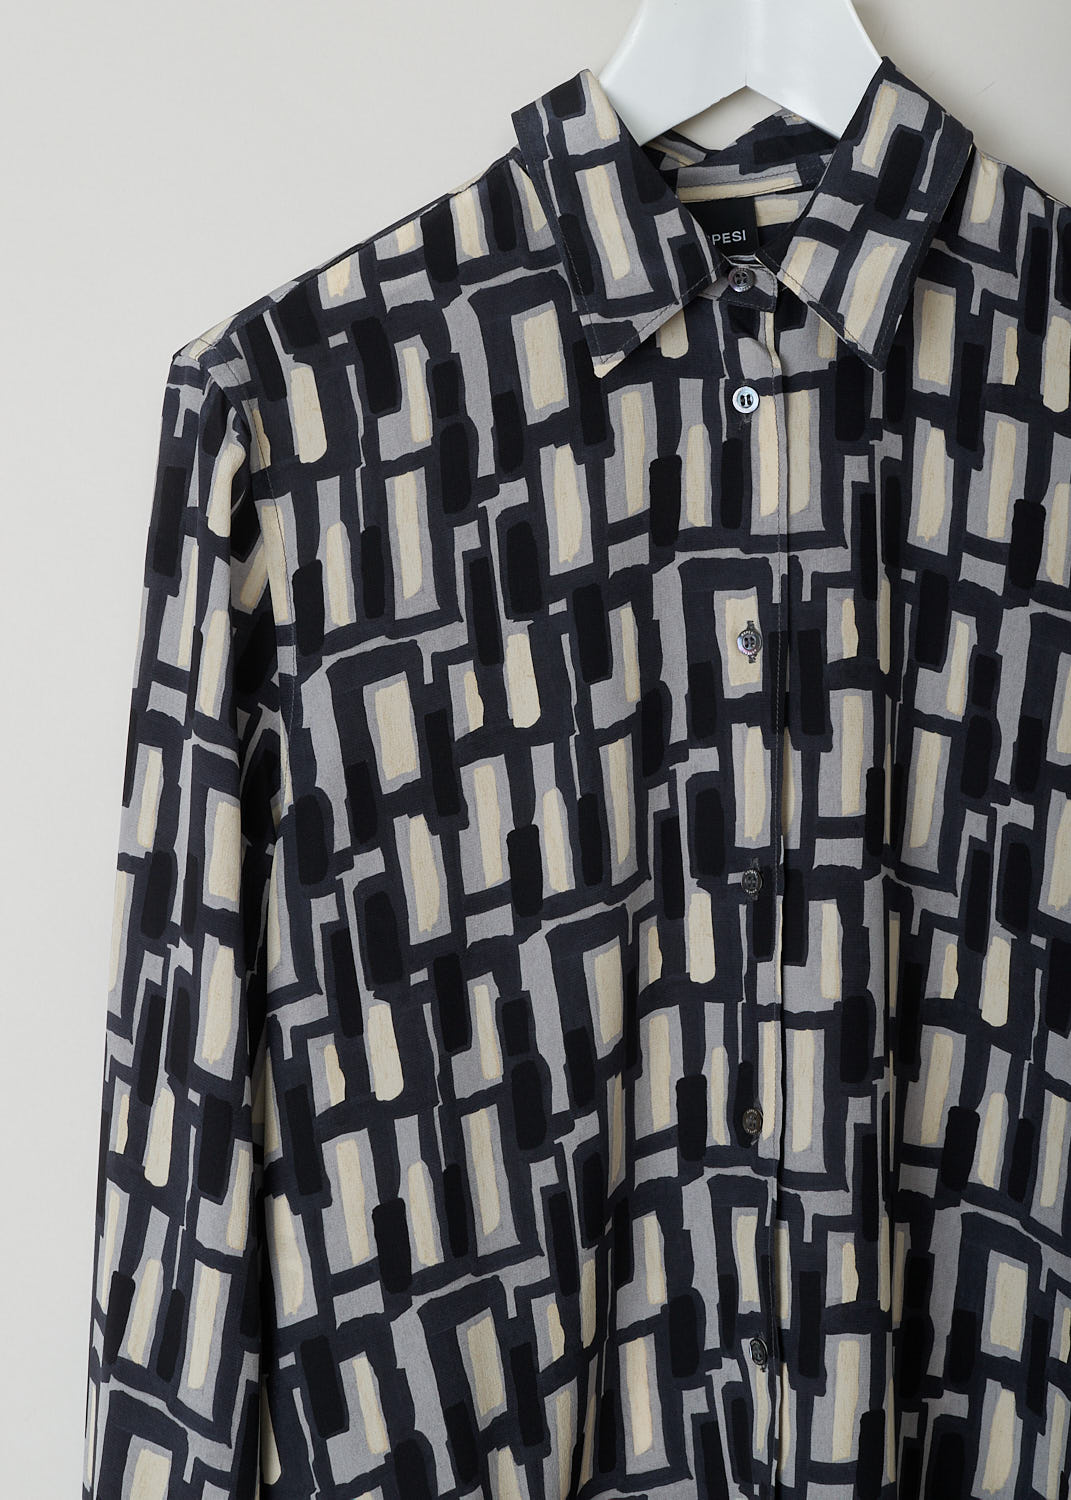 ASPESI, SILK PRINTED BLOUSE, 5422_V126_66173, Print, Detail, This long sleeved blouse has a geometric print in black, grey and off-white hues. The blouse has a classic collar, front button closure and an asymmetric finish, meaning the back is slightly longer than the front. 
